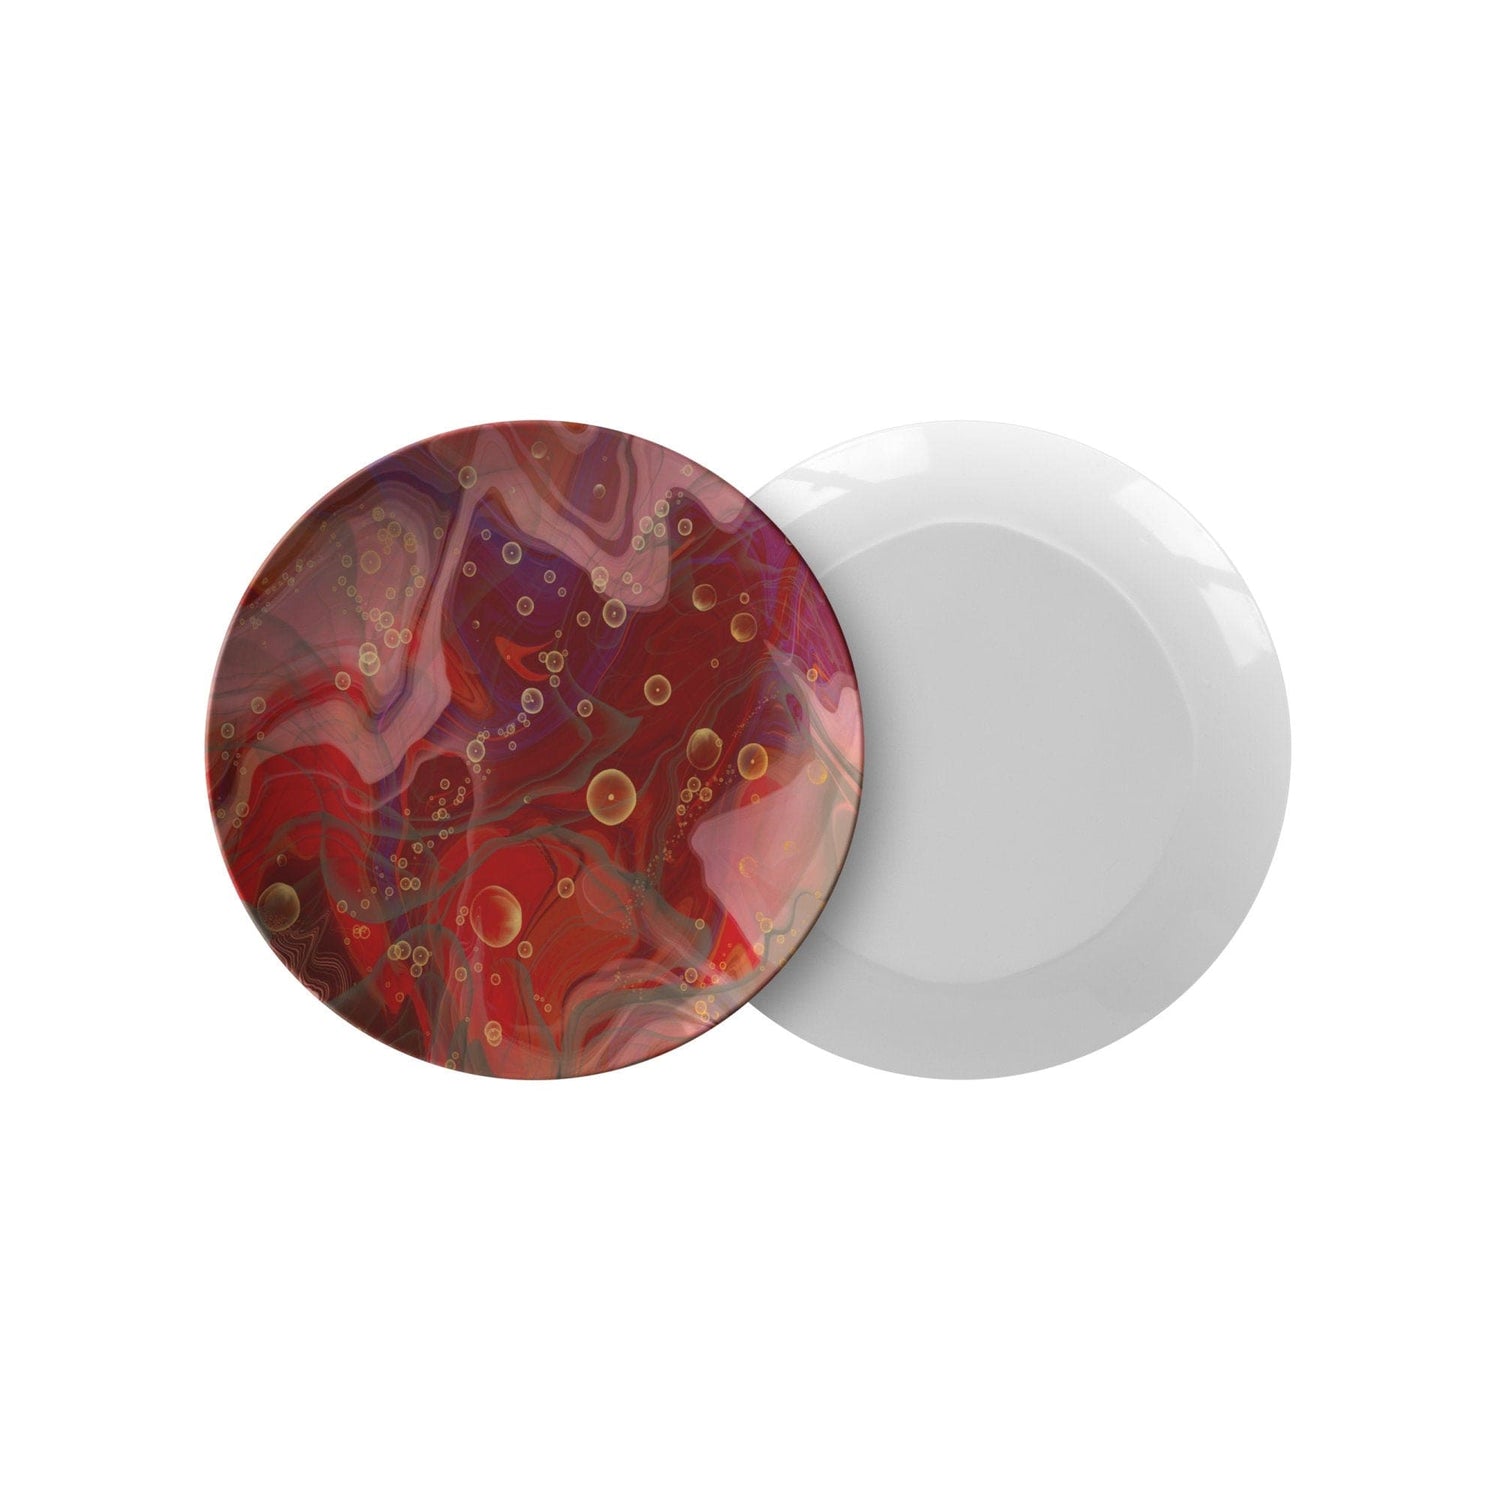 Kate McEnroe New York Red and Gold Marble Dinner Plates Plates Set of Two P20-MAR-RED-33B2